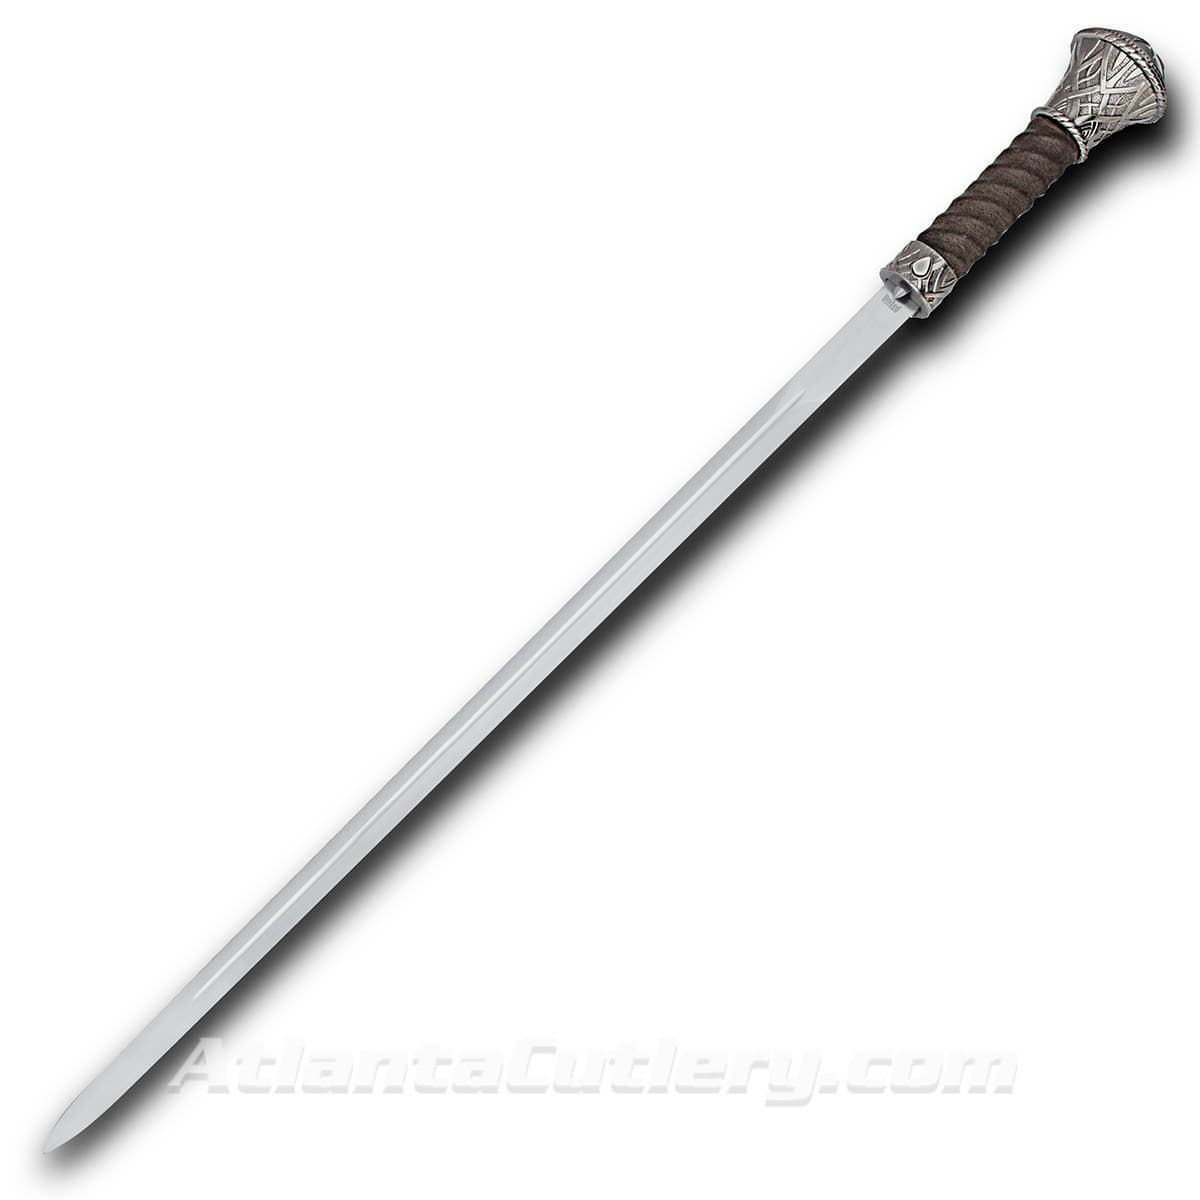 Sharp double-edged 1045 carbon steel blade on Shikoto sword cane has release/locking mechanism and intricately detailed cast pommel